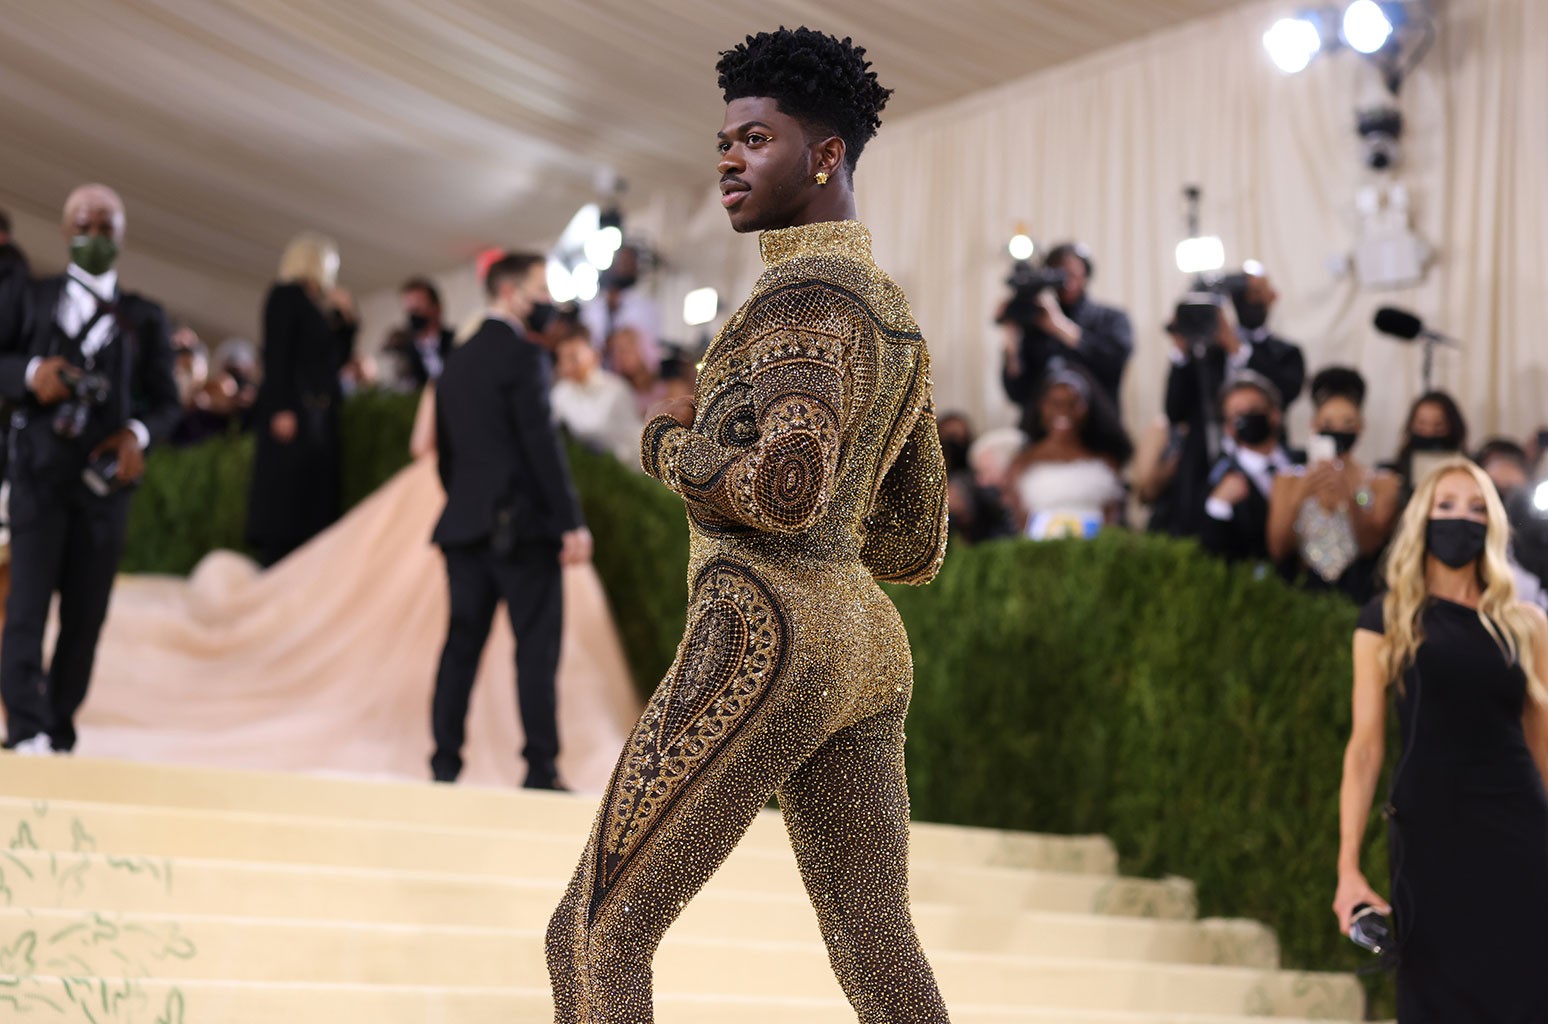 The men of the Met Gala did not disappoint at all and sashayed down the red...